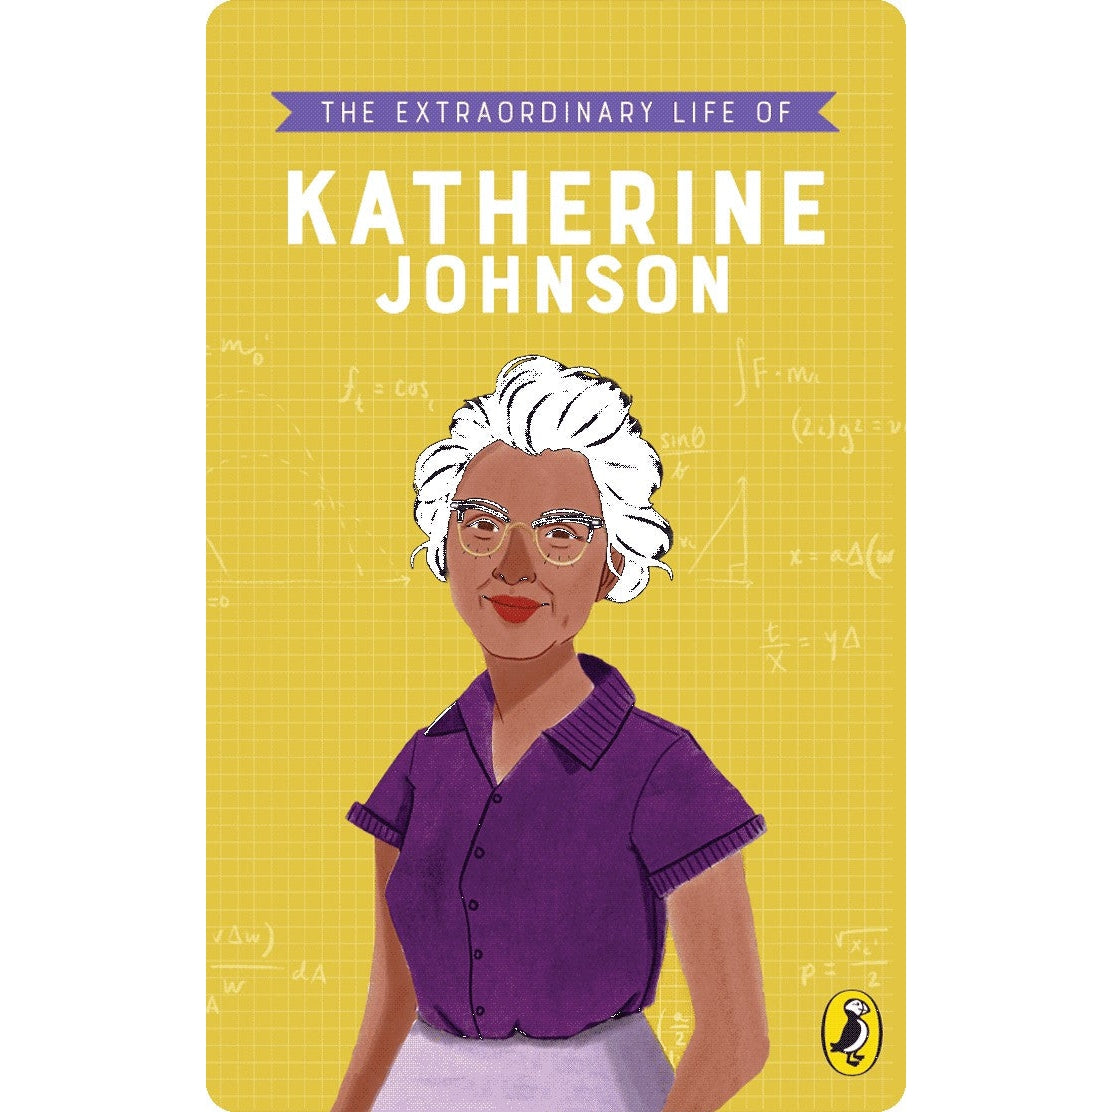 Yoto Card - The Extraordinary Life of Katherine Johnson - Child Friendly Audio Story Card for the Yoto Player